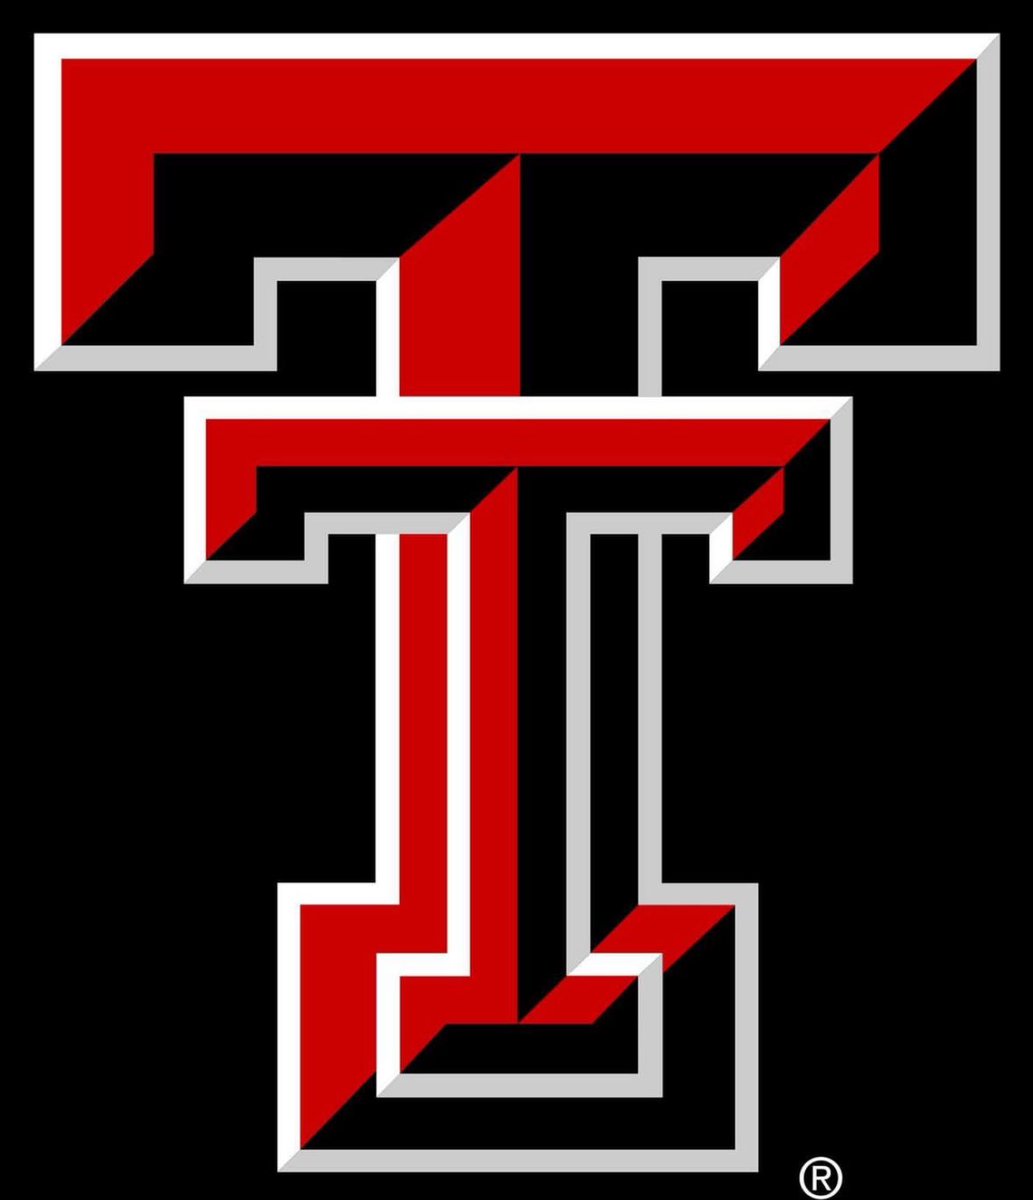 Wow!! #AGTG I'm blessed to receive an offer to play🏈for @TexasTech 🙏🏾 #mblock @MarshallBuffs @Perroni247 @ErikRichardsUSA @MikeRoach247 @jarmant1 @Coach_AntWilson @texashsfootball @YounBanks219 @Coach_ISweeney @_CoachGregg